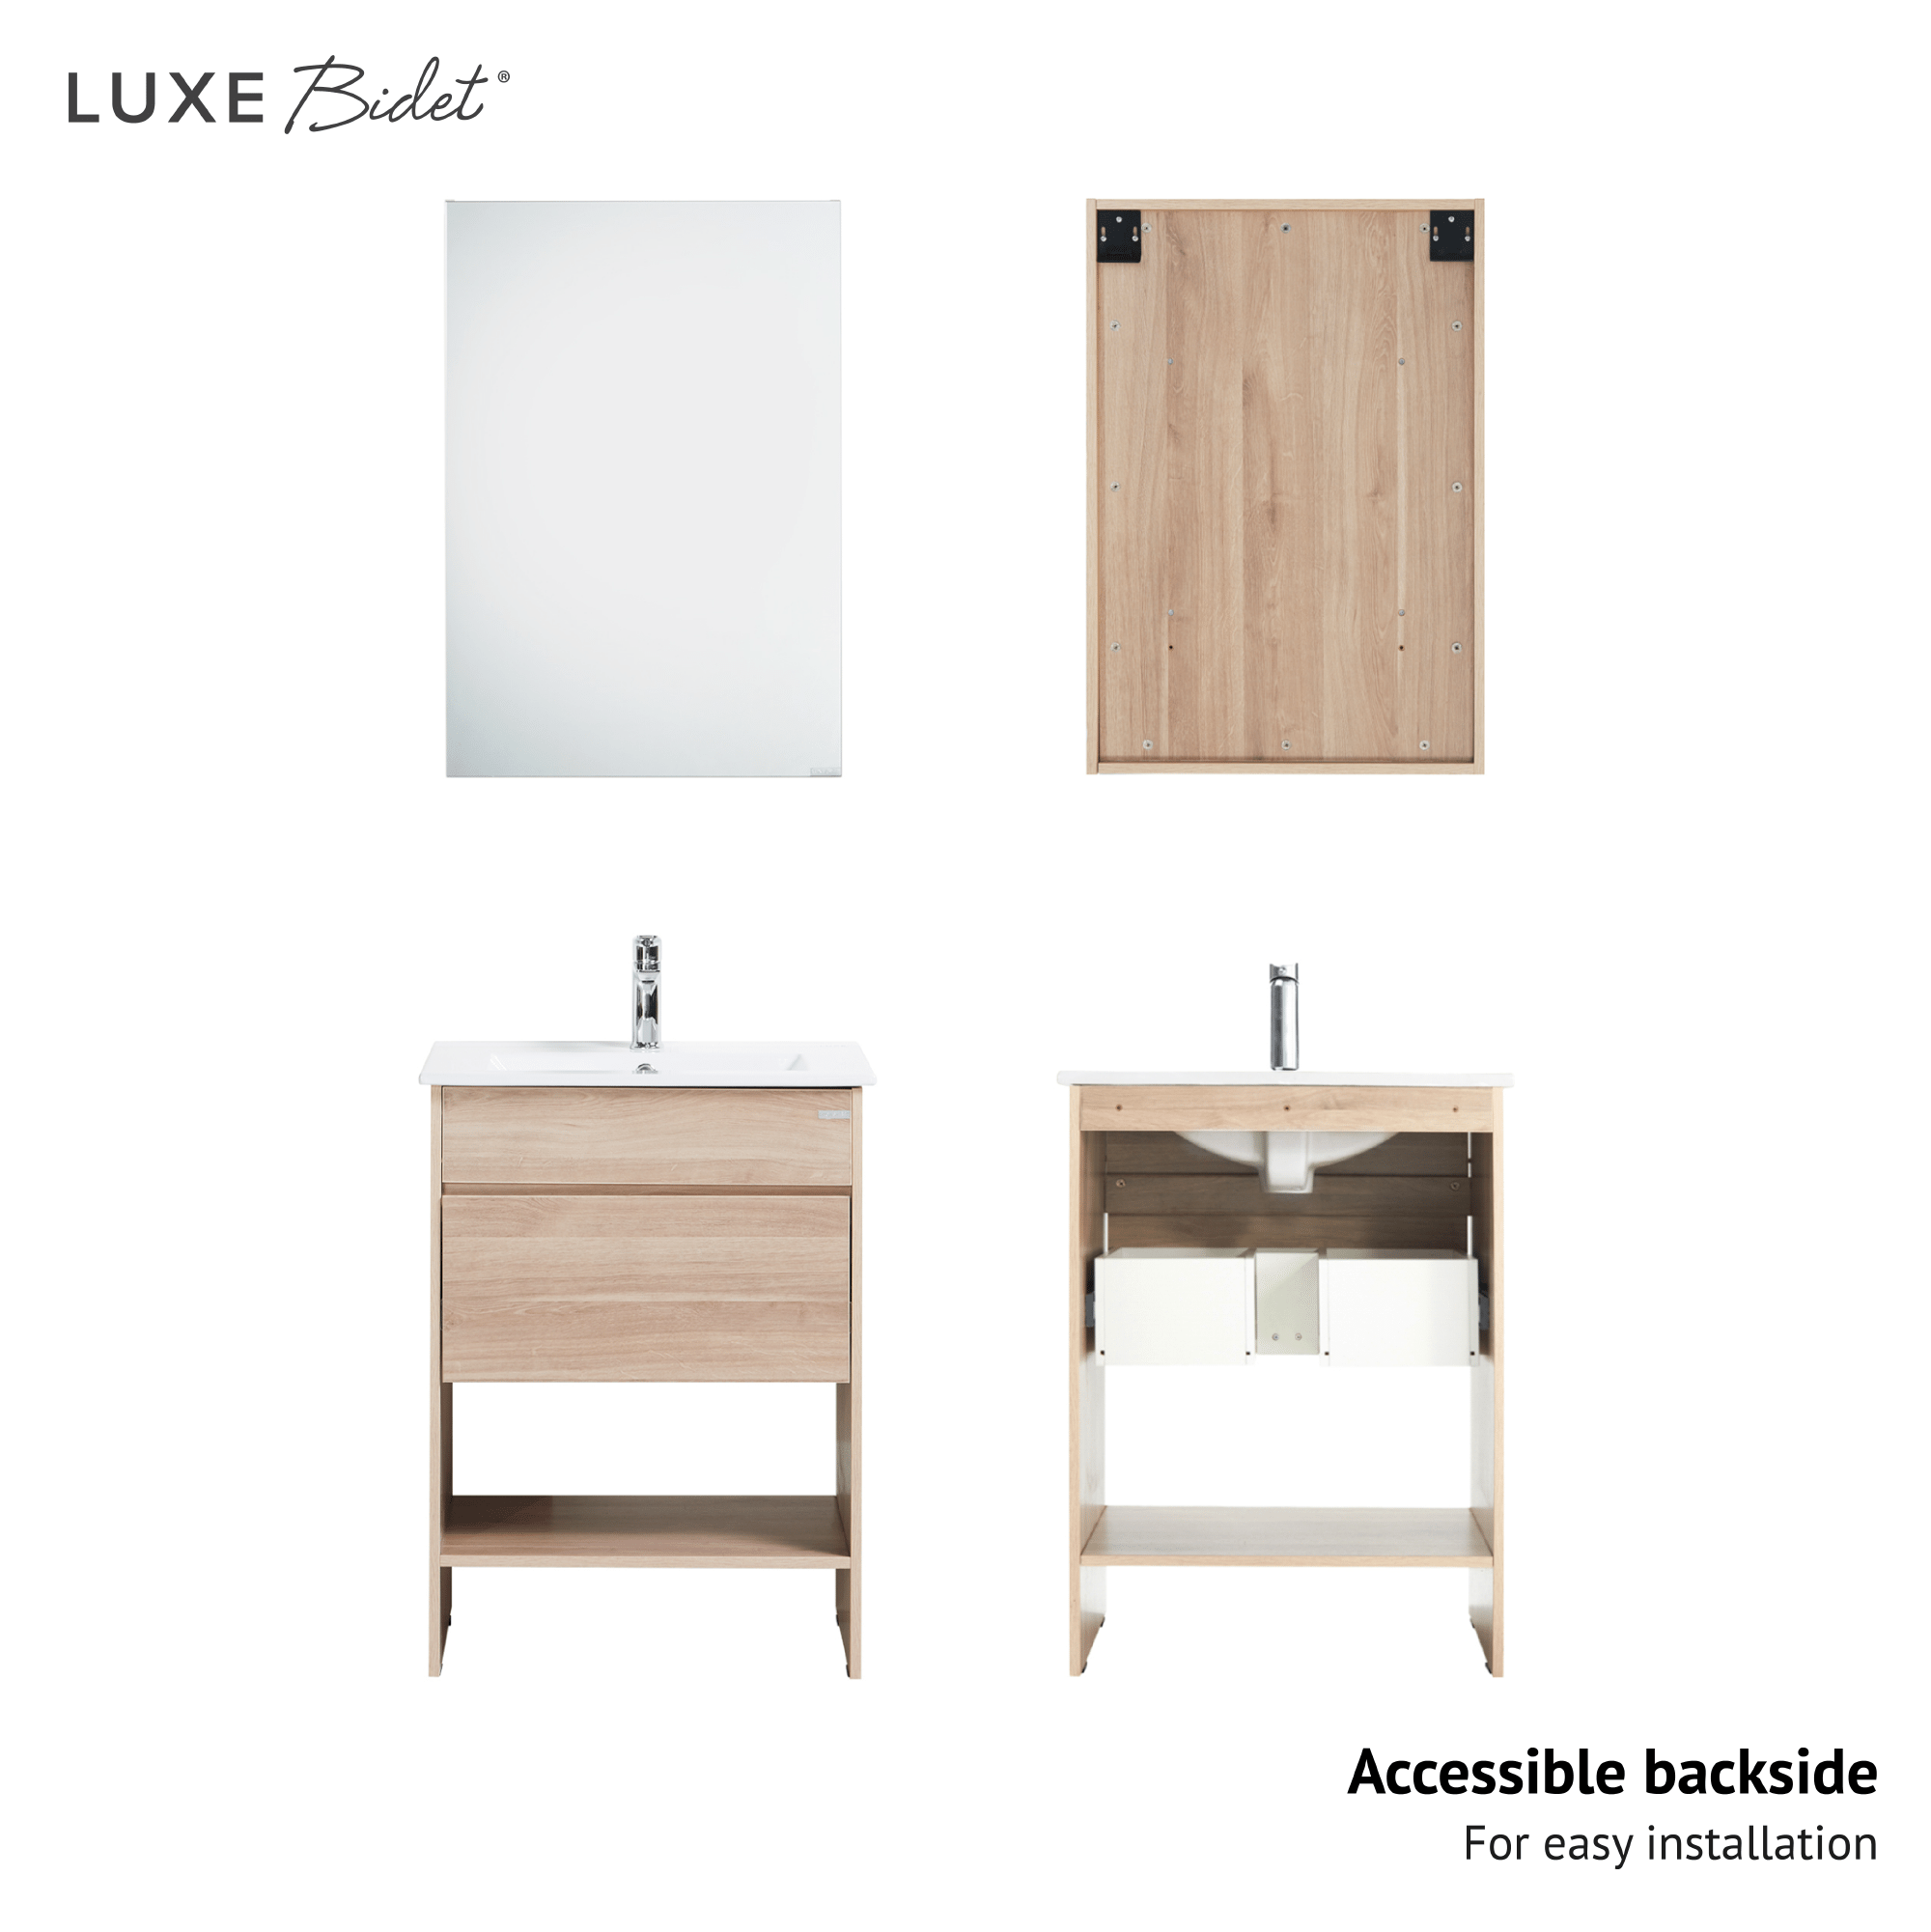 Zeno Bathroom Vanity Set, front and back, the backside is accessible for easy installation